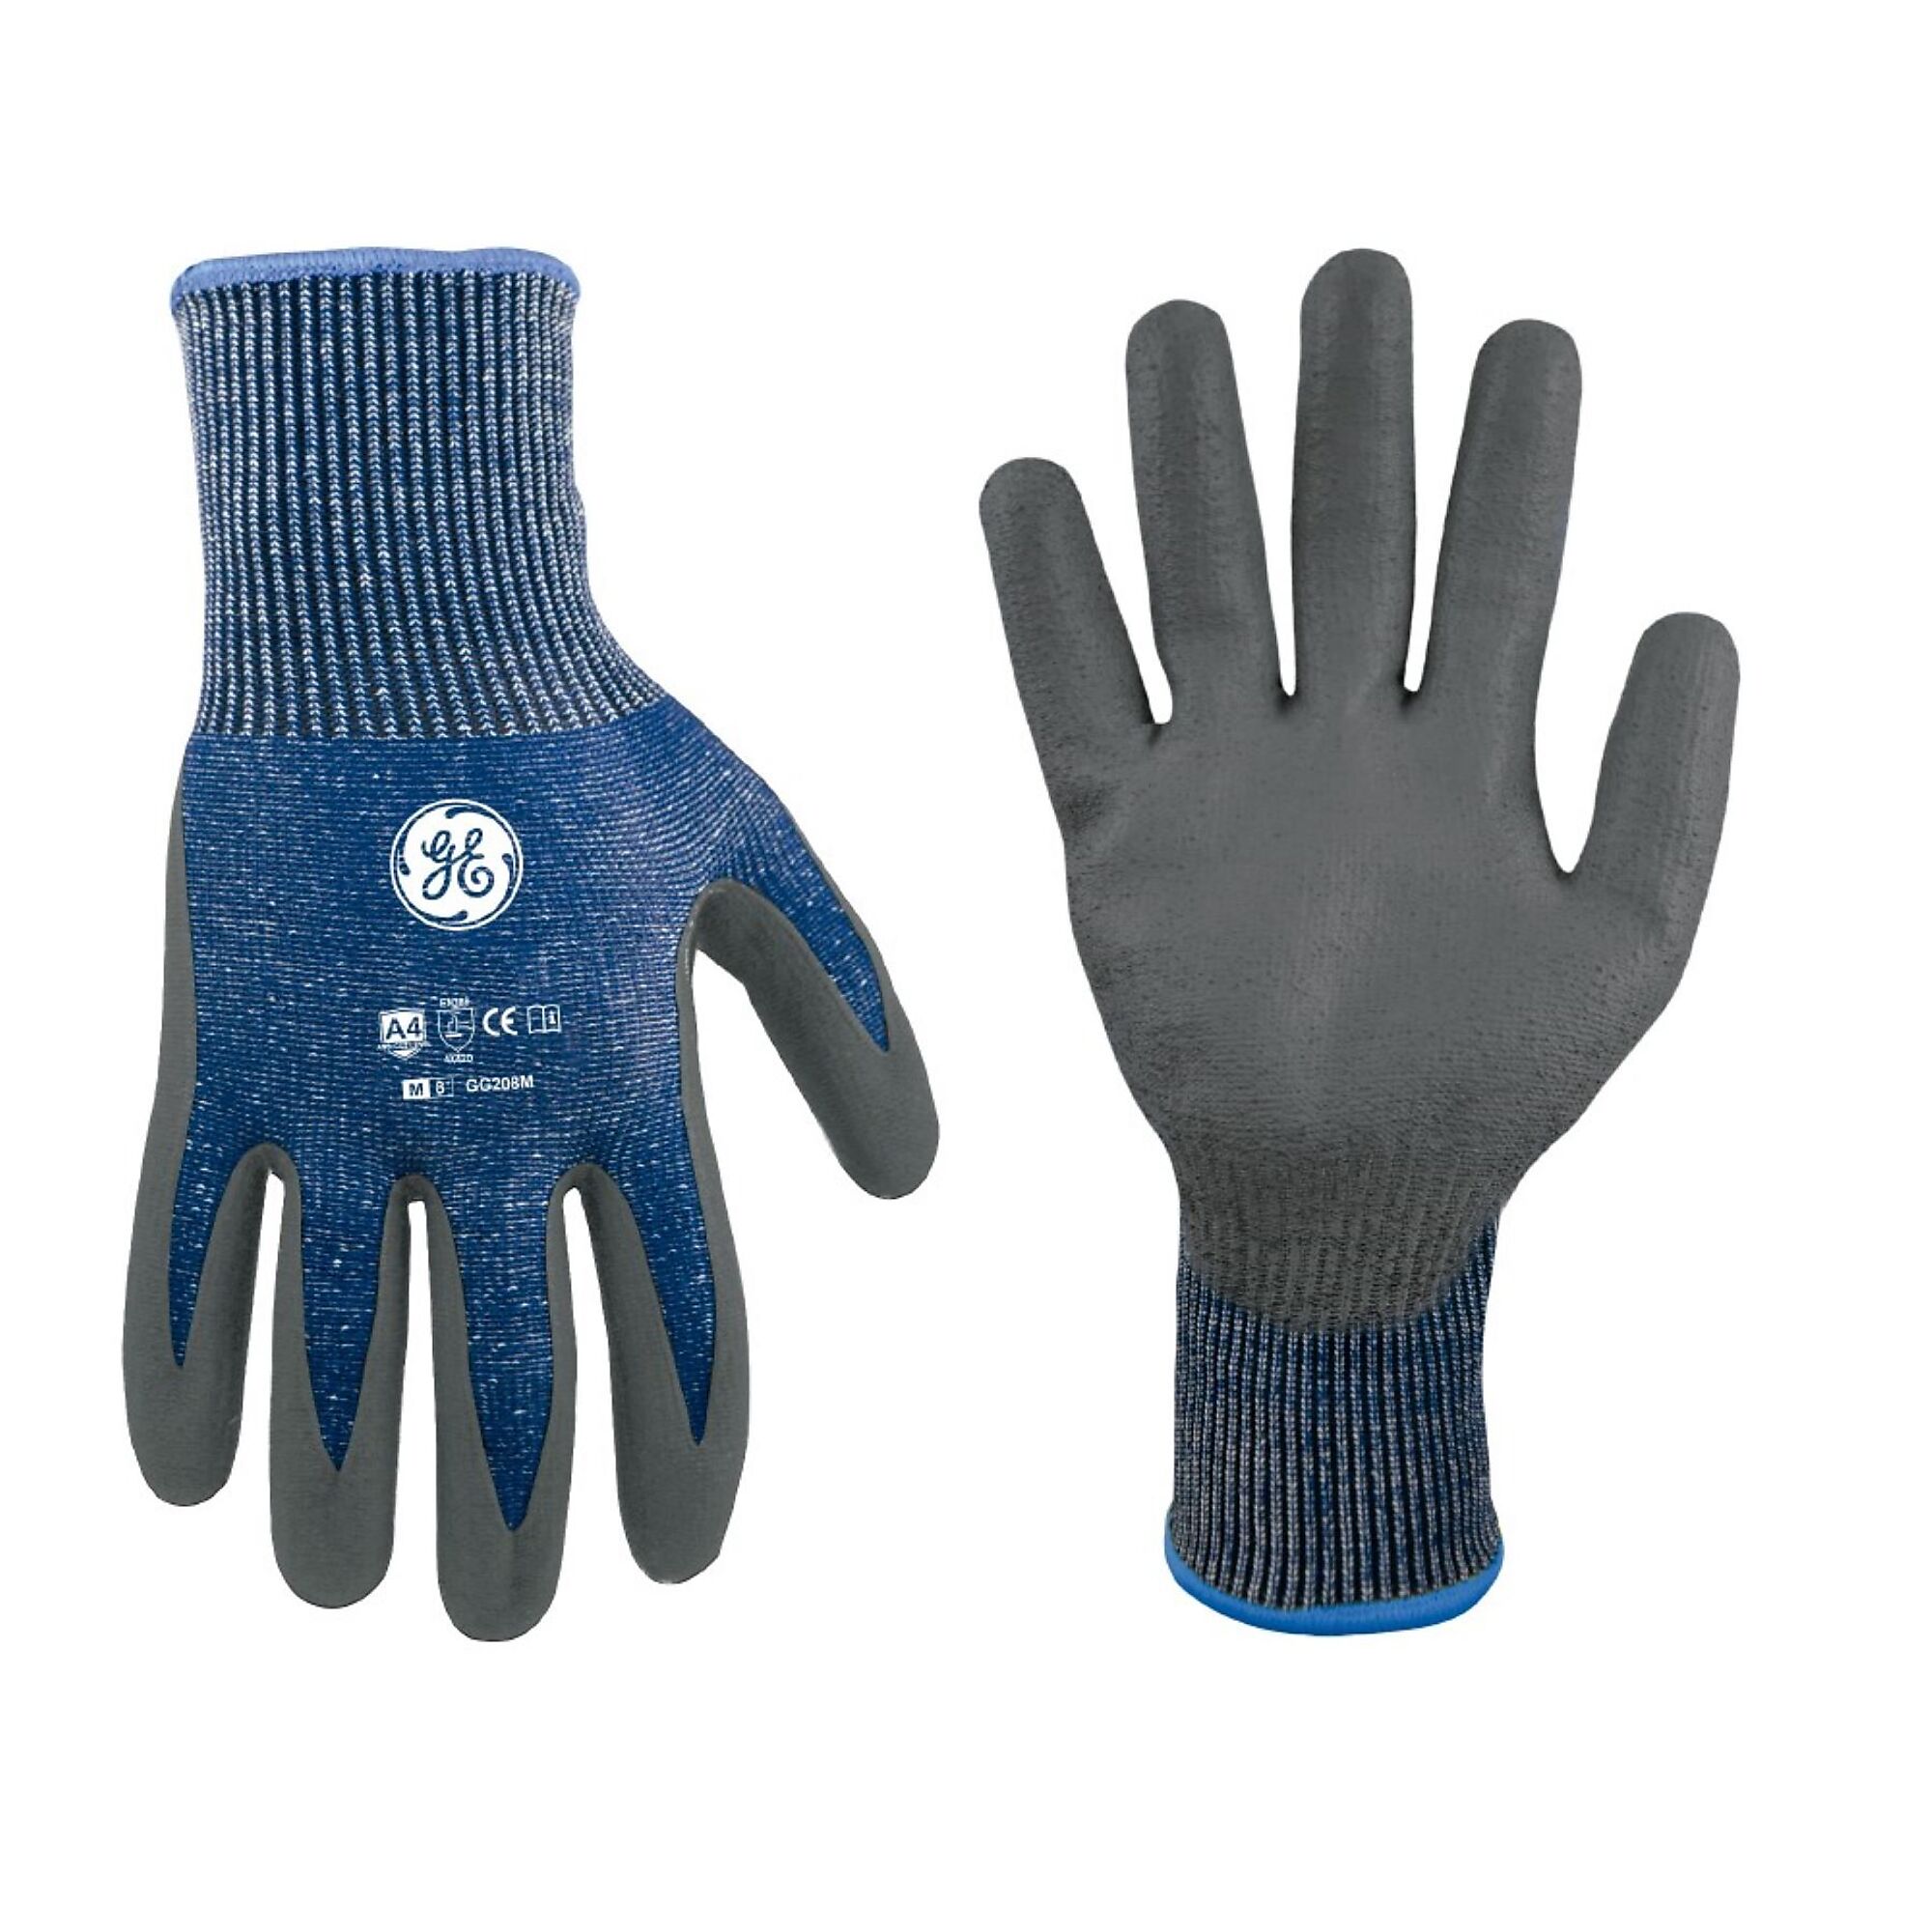 General Electric, Cut Resistant Gloves Blue/Gray L 12 pair, Size M, Color Gray, Included (qty.) 12 Model GG208M